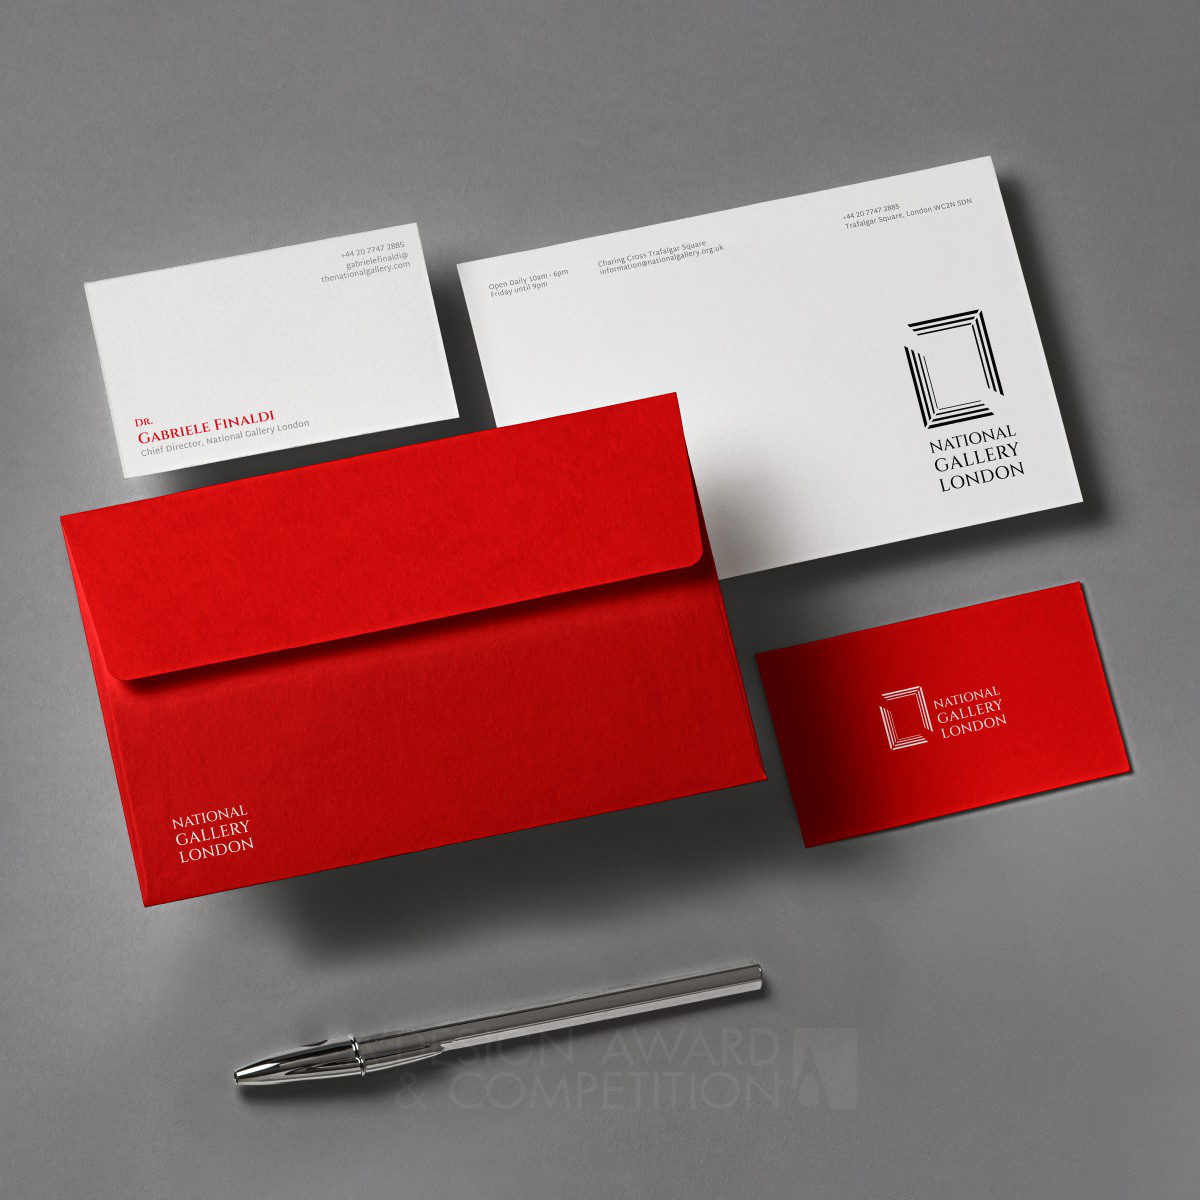 The National Gallery Visual Identity by Meng Chu Huang